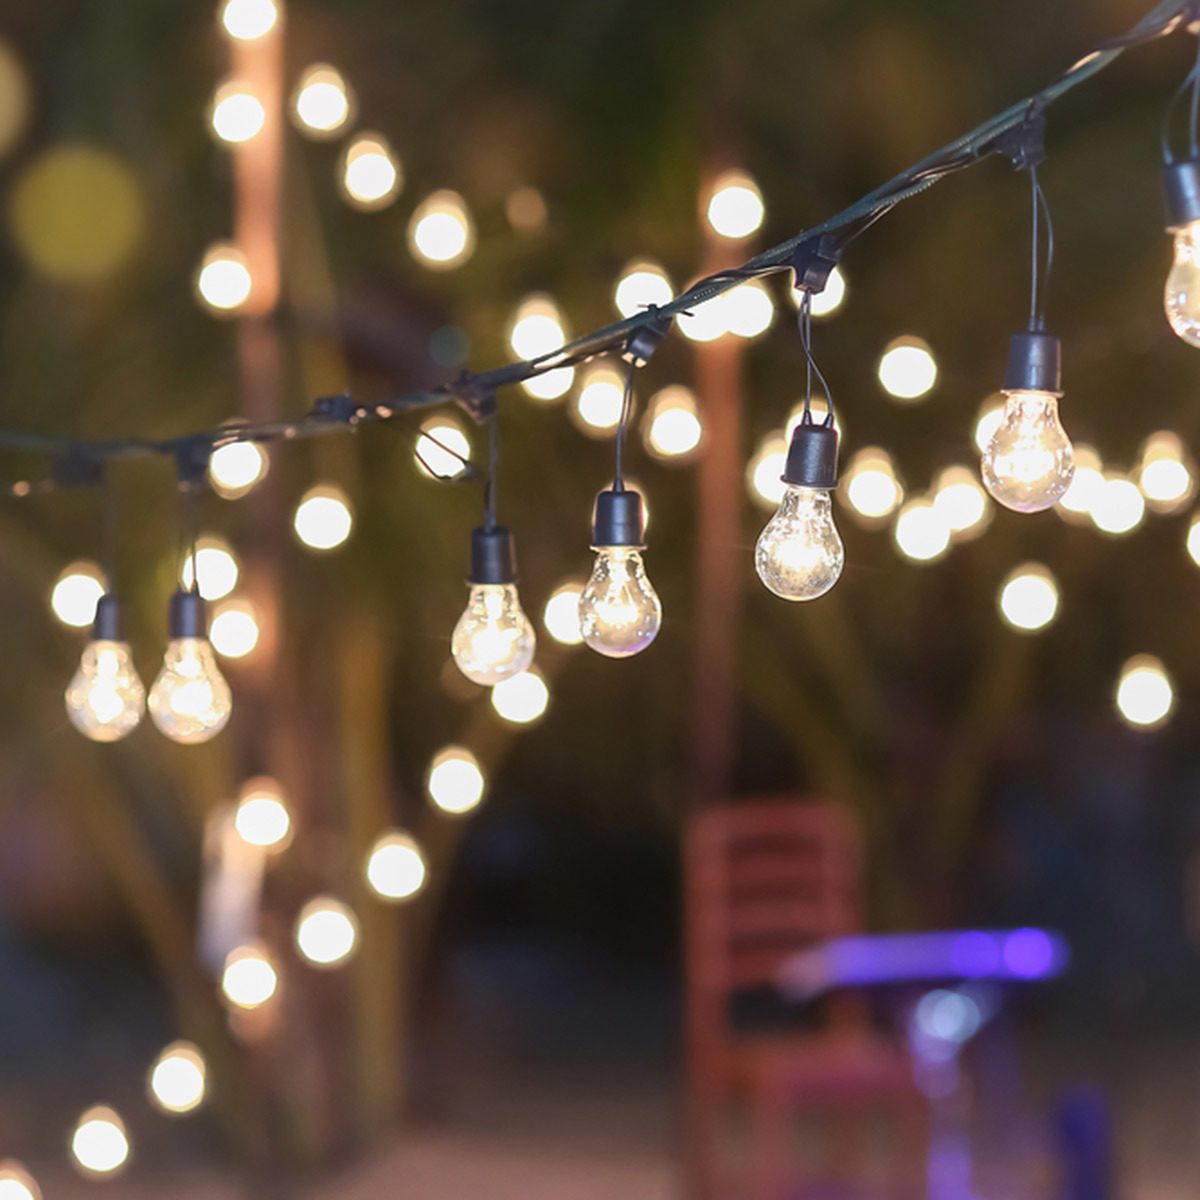 15 Ideas For Outdoor String Lights That Will Make You Want to Live Outside